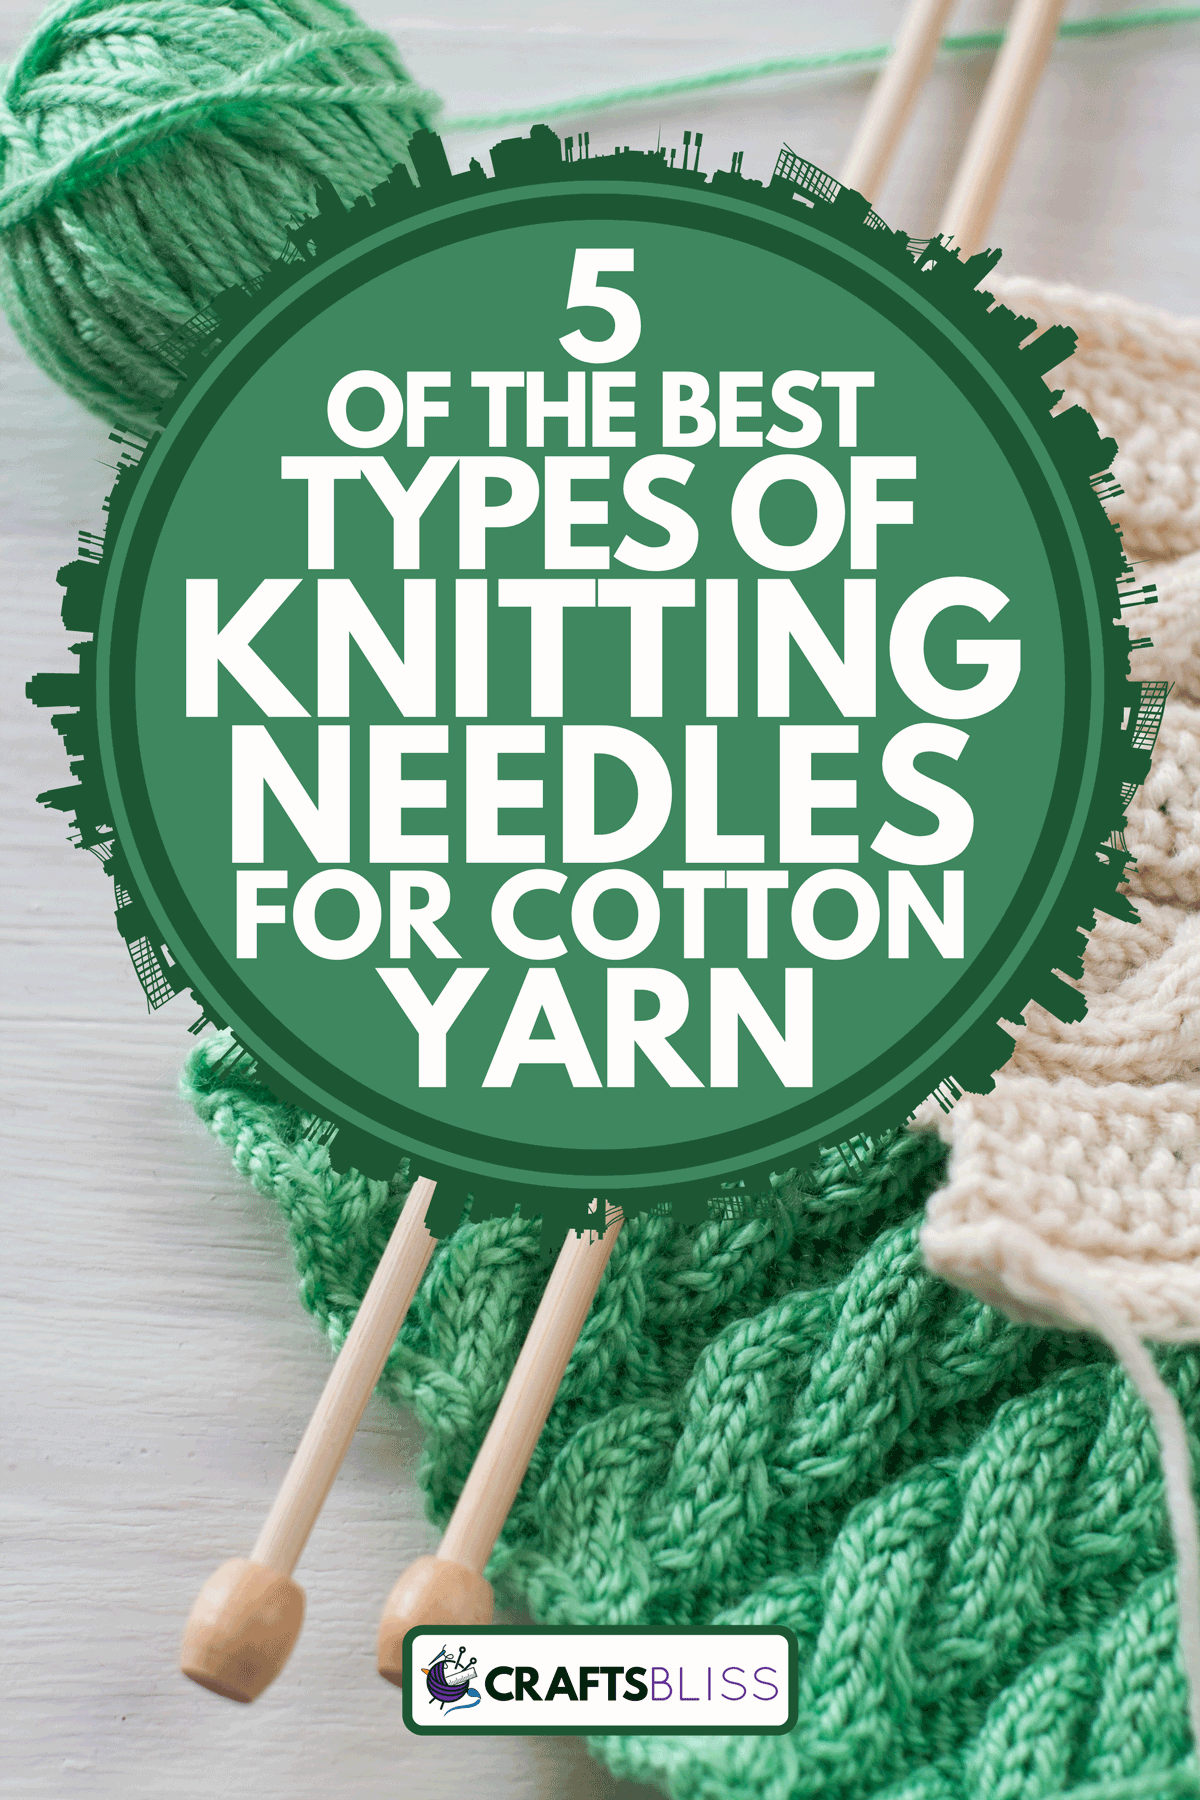 A yarn balls and needles for knitting, 5 Of The Best Types Of Knitting Needles For Cotton Yarn